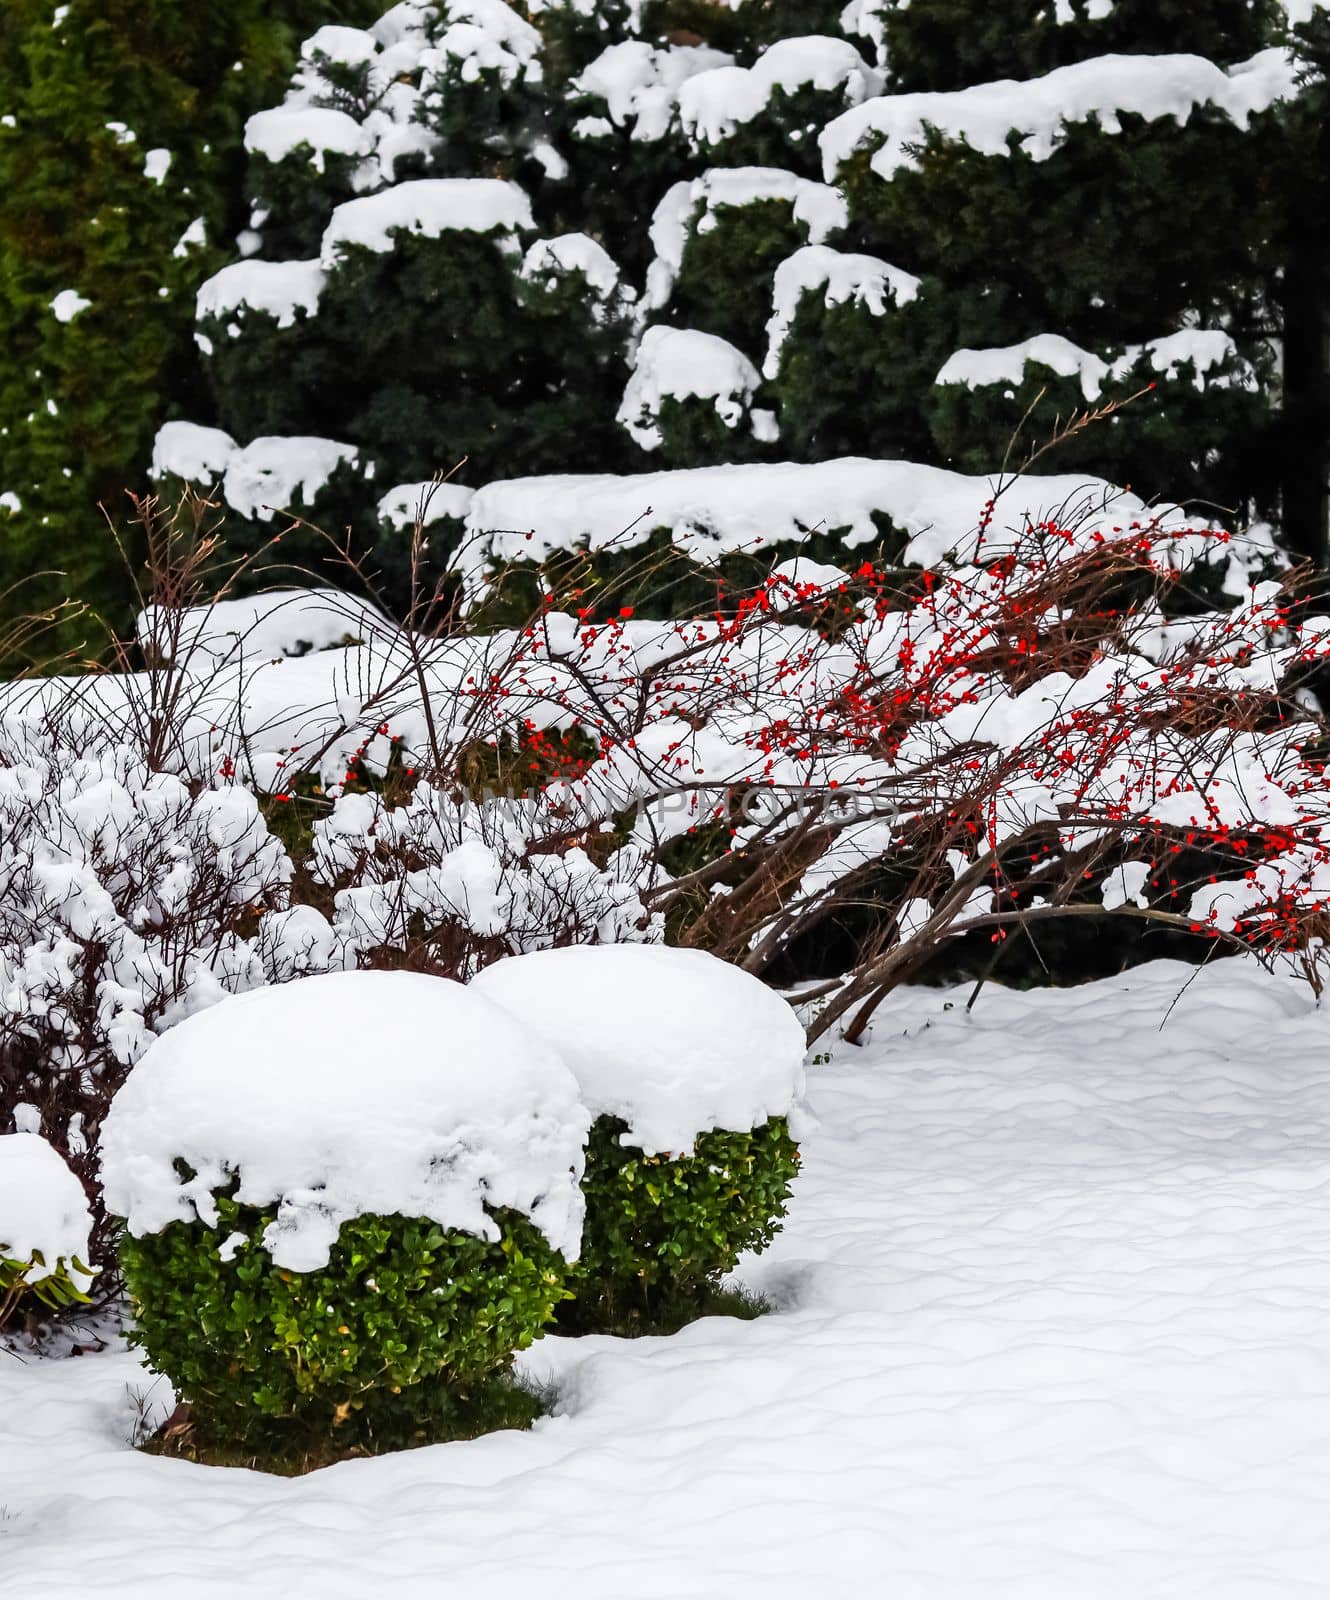 Winter garden with decorative shrubs and shaped yew and boxwood, Buxus, covered with a thick layer of white fluffy snow. Gardening concept.